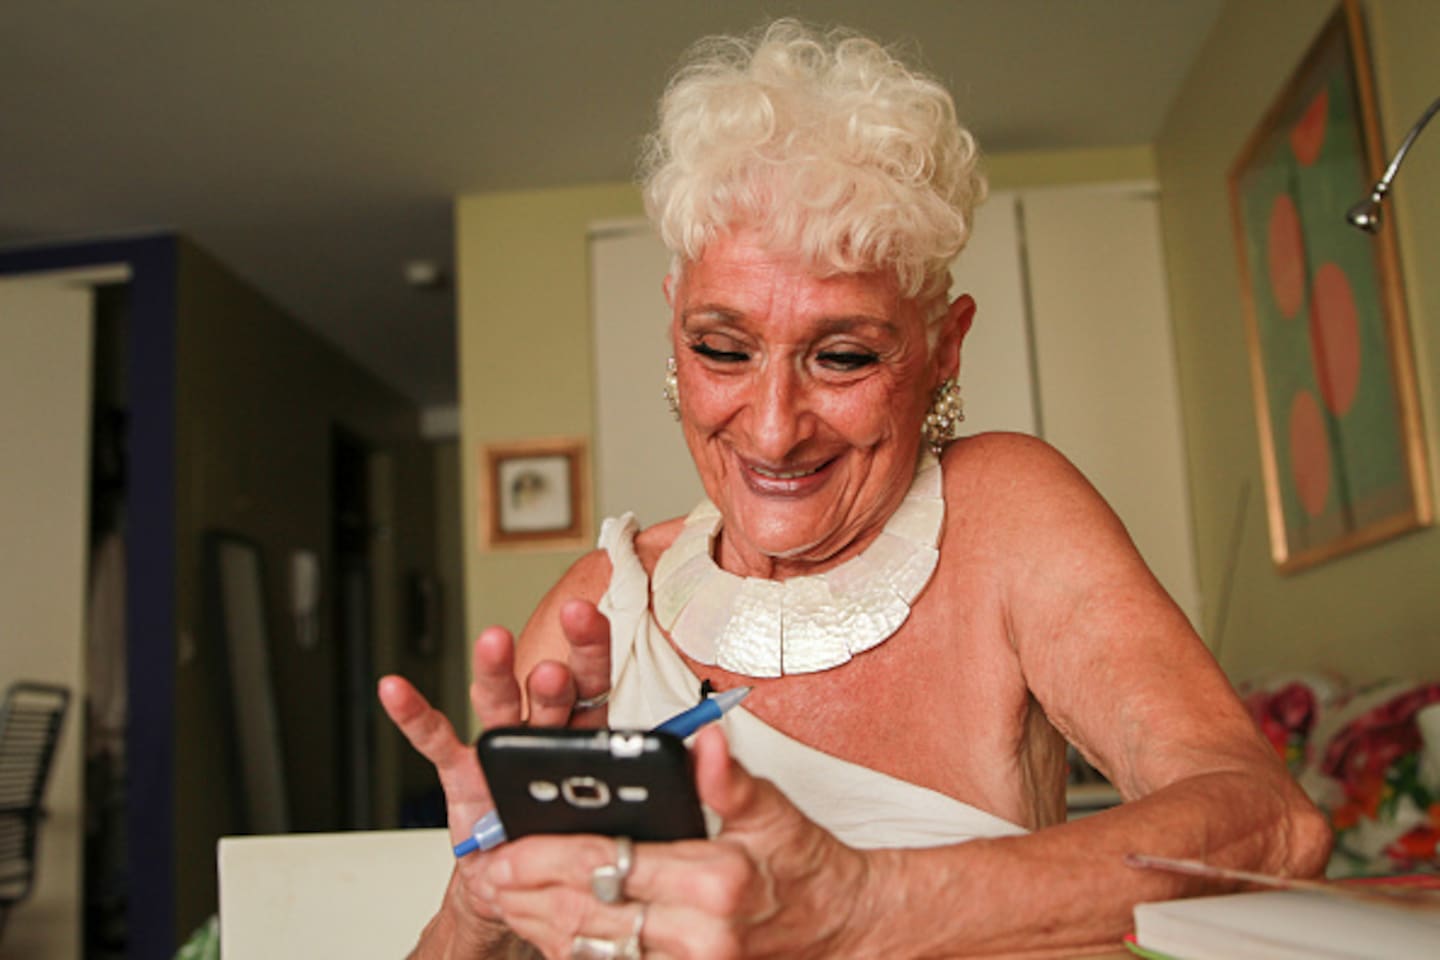 Tinder Granny 83 Ready To Settle Down After Decades Of One Night